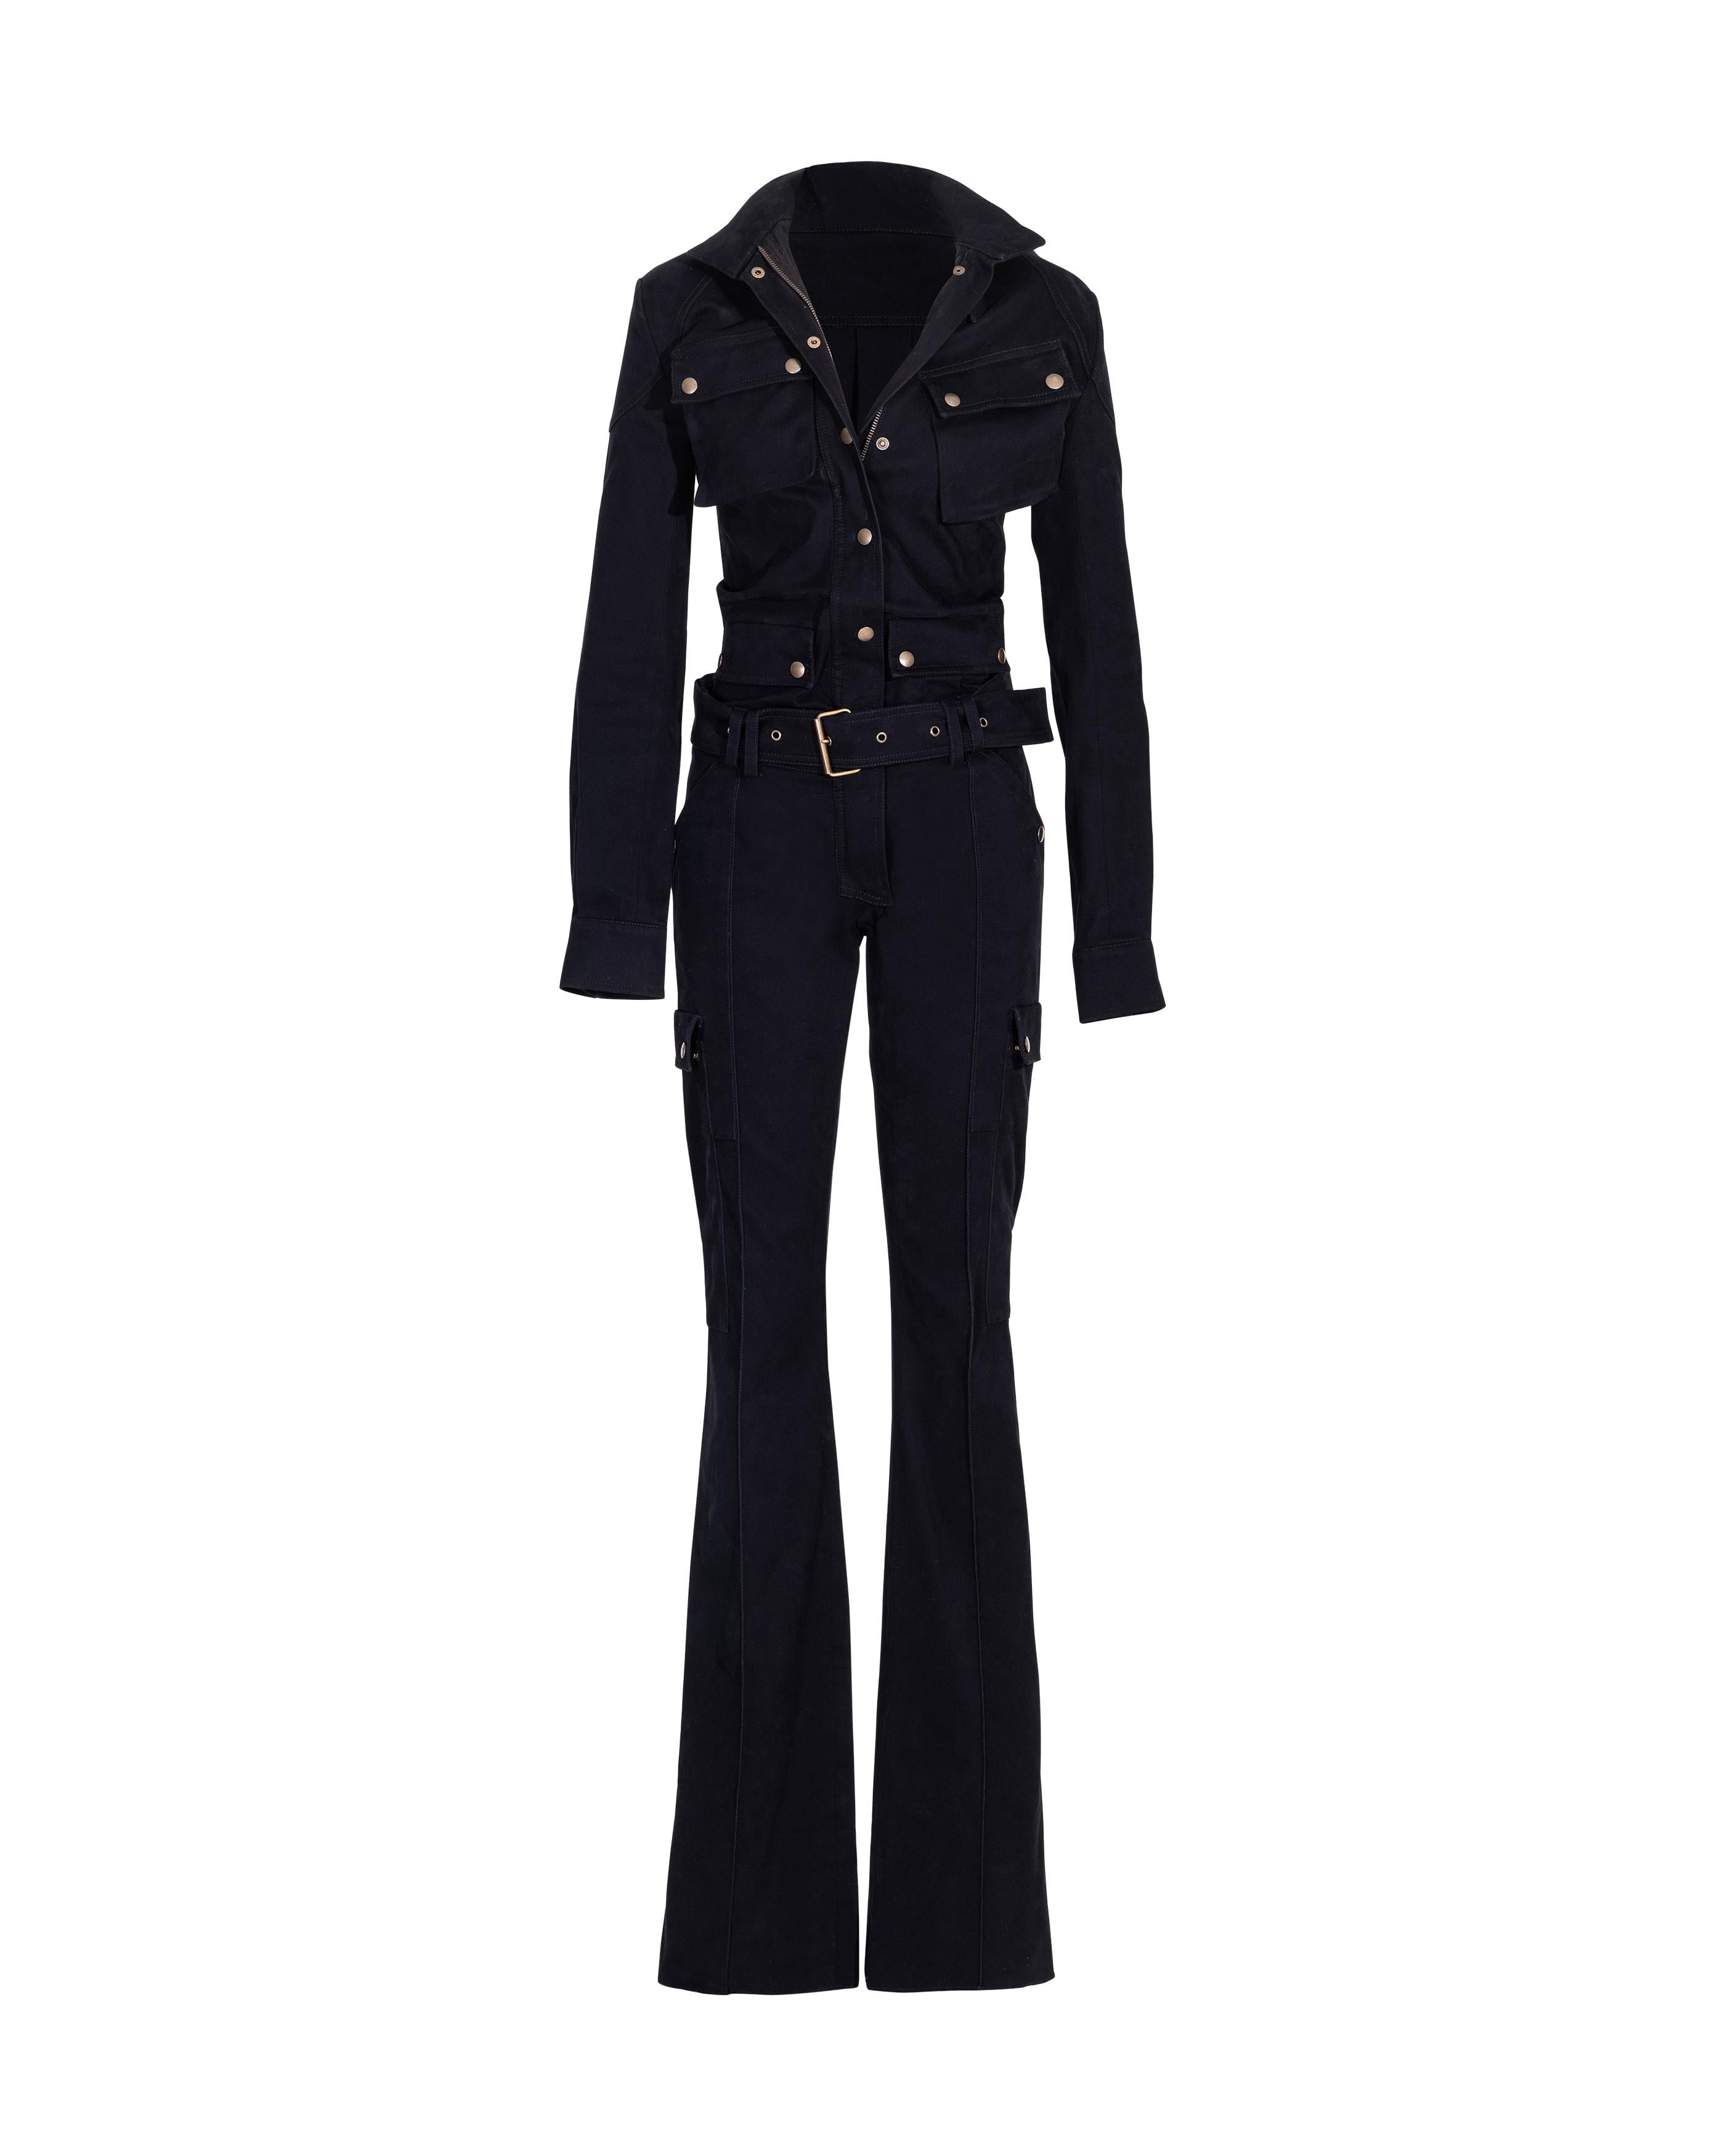 A/W 2001 Balenciaga by Nicolas Ghesquiere Black Jumpsuit with Bronze Hardware For Sale 5